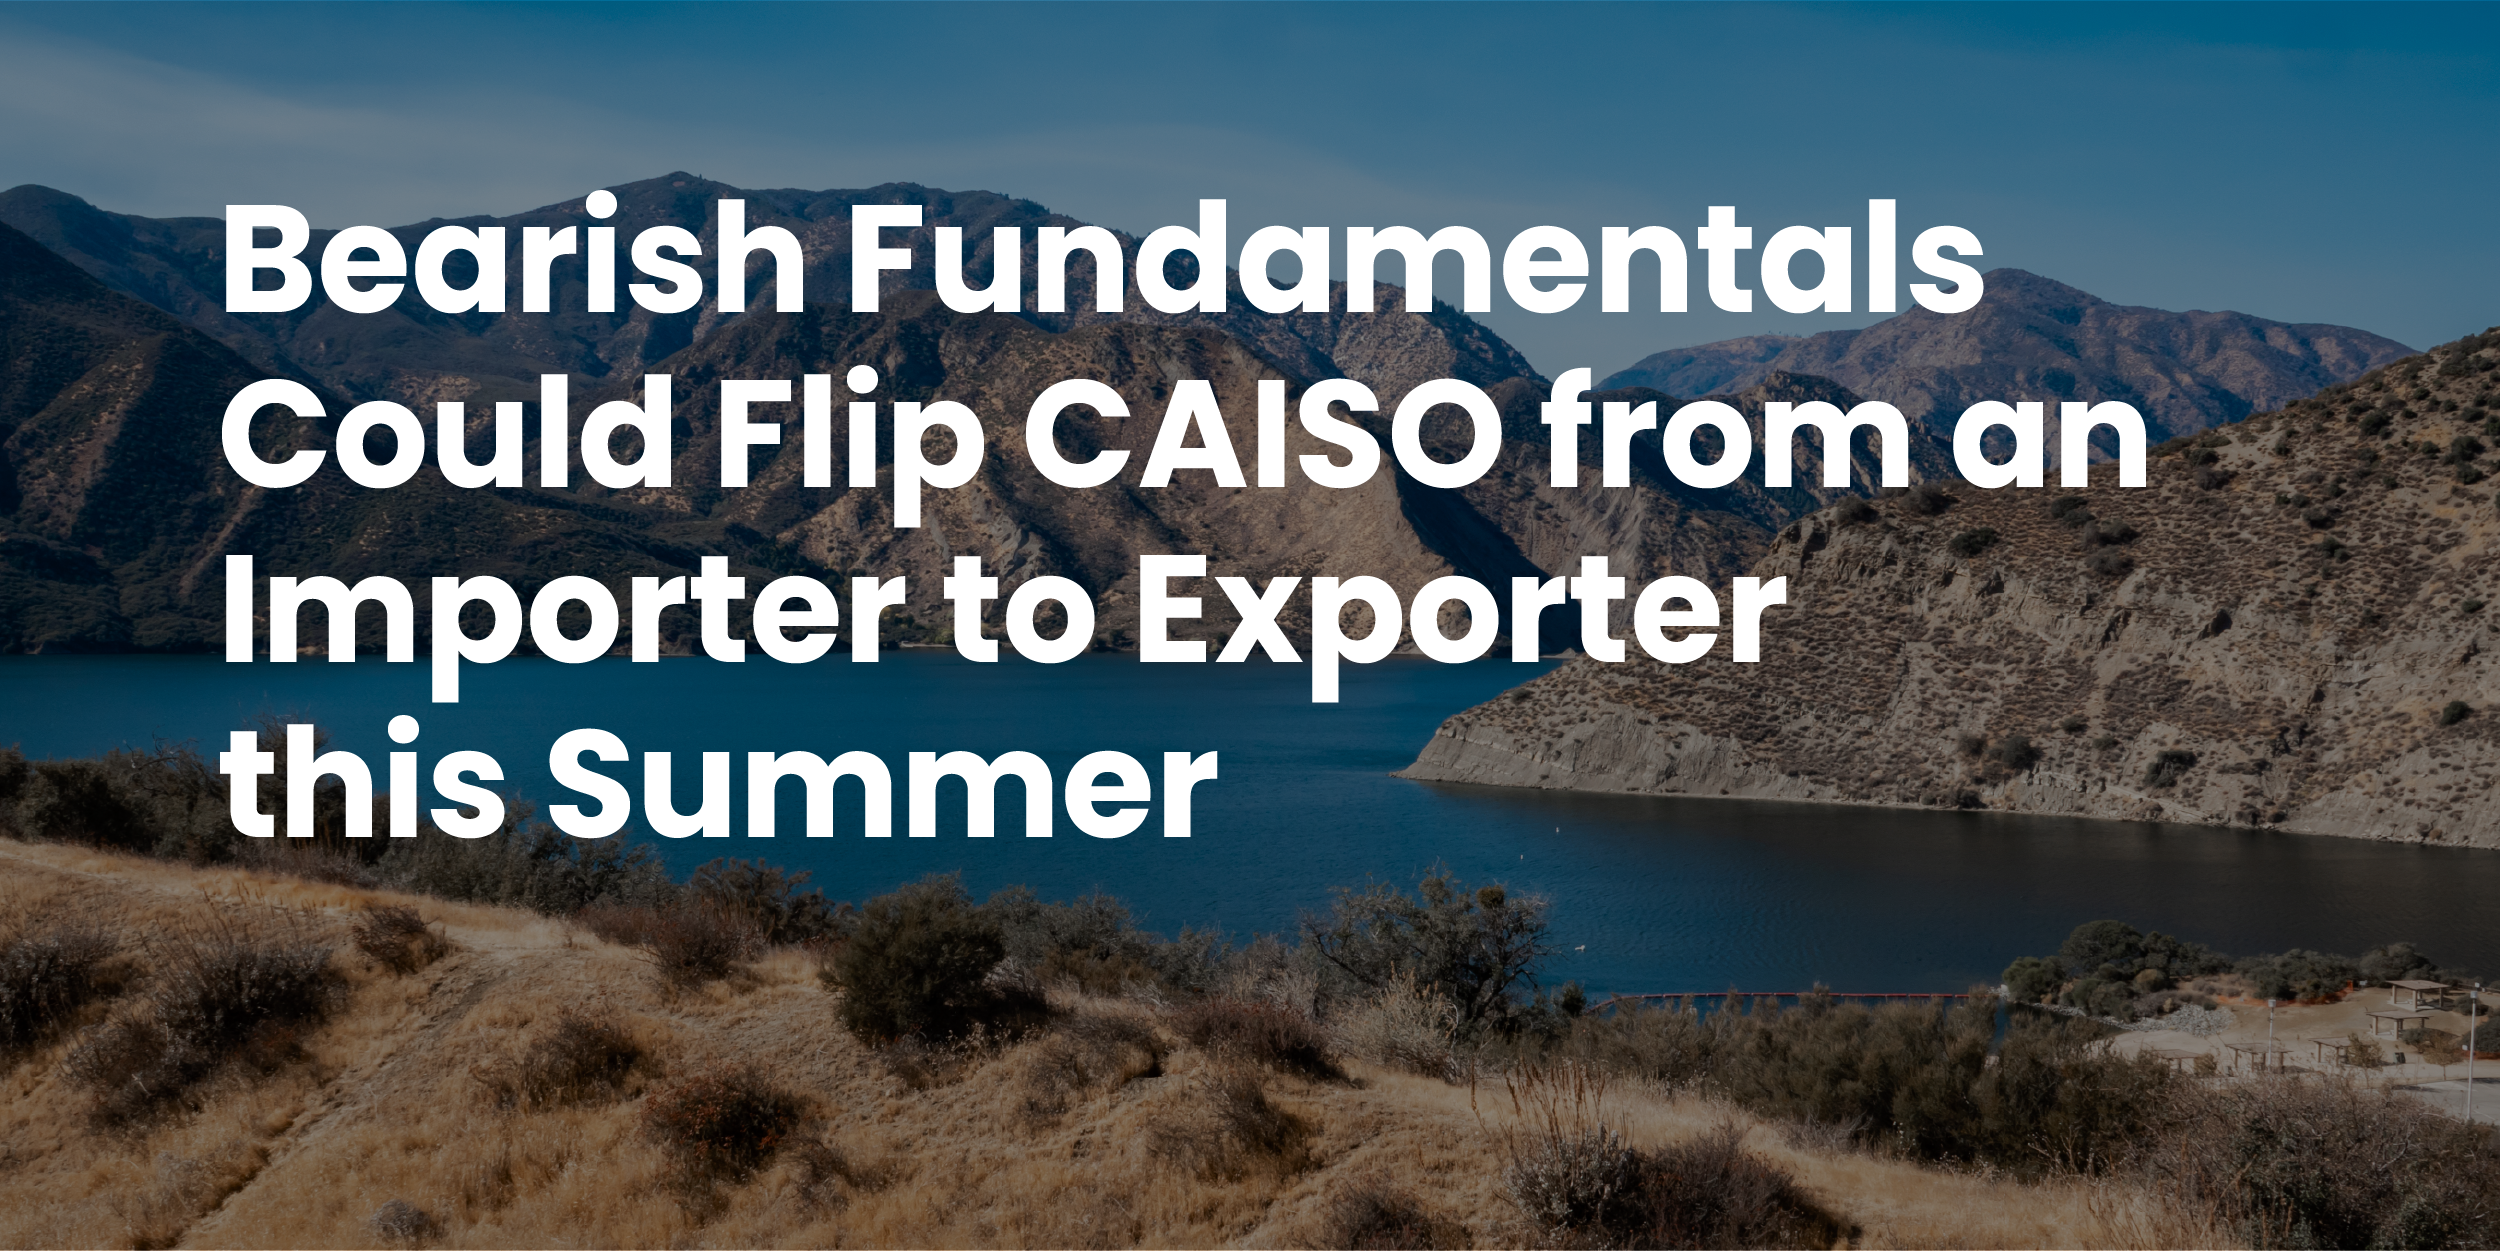 bearish fundamentals could flip CAISO from importer to exporter this summer